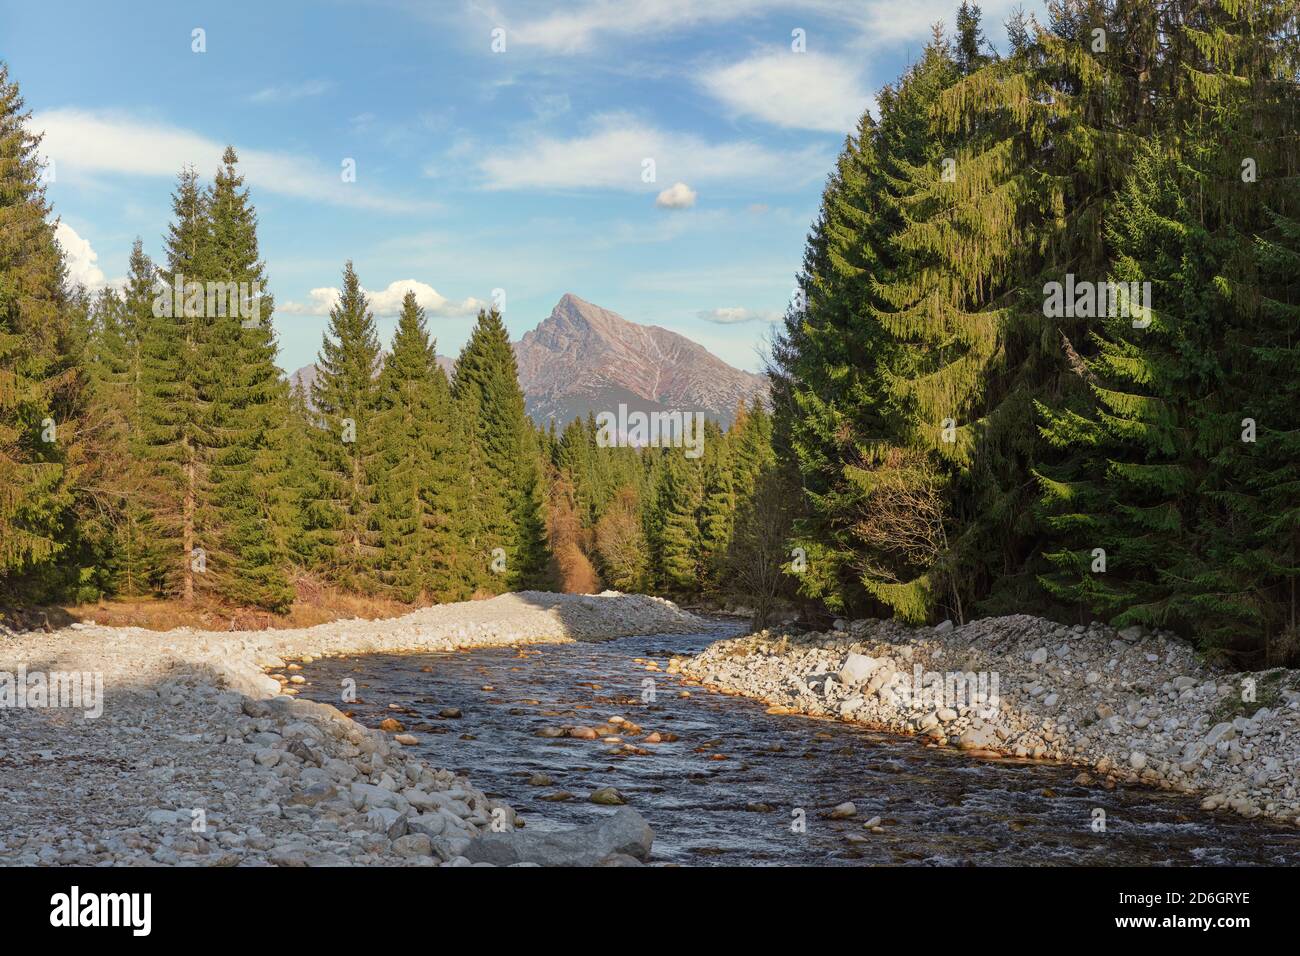 Forest river Bela with small round stones and coniferous trees on both sides, sunny day, Krivan peak - Slovak symbol - in distance Stock Photo